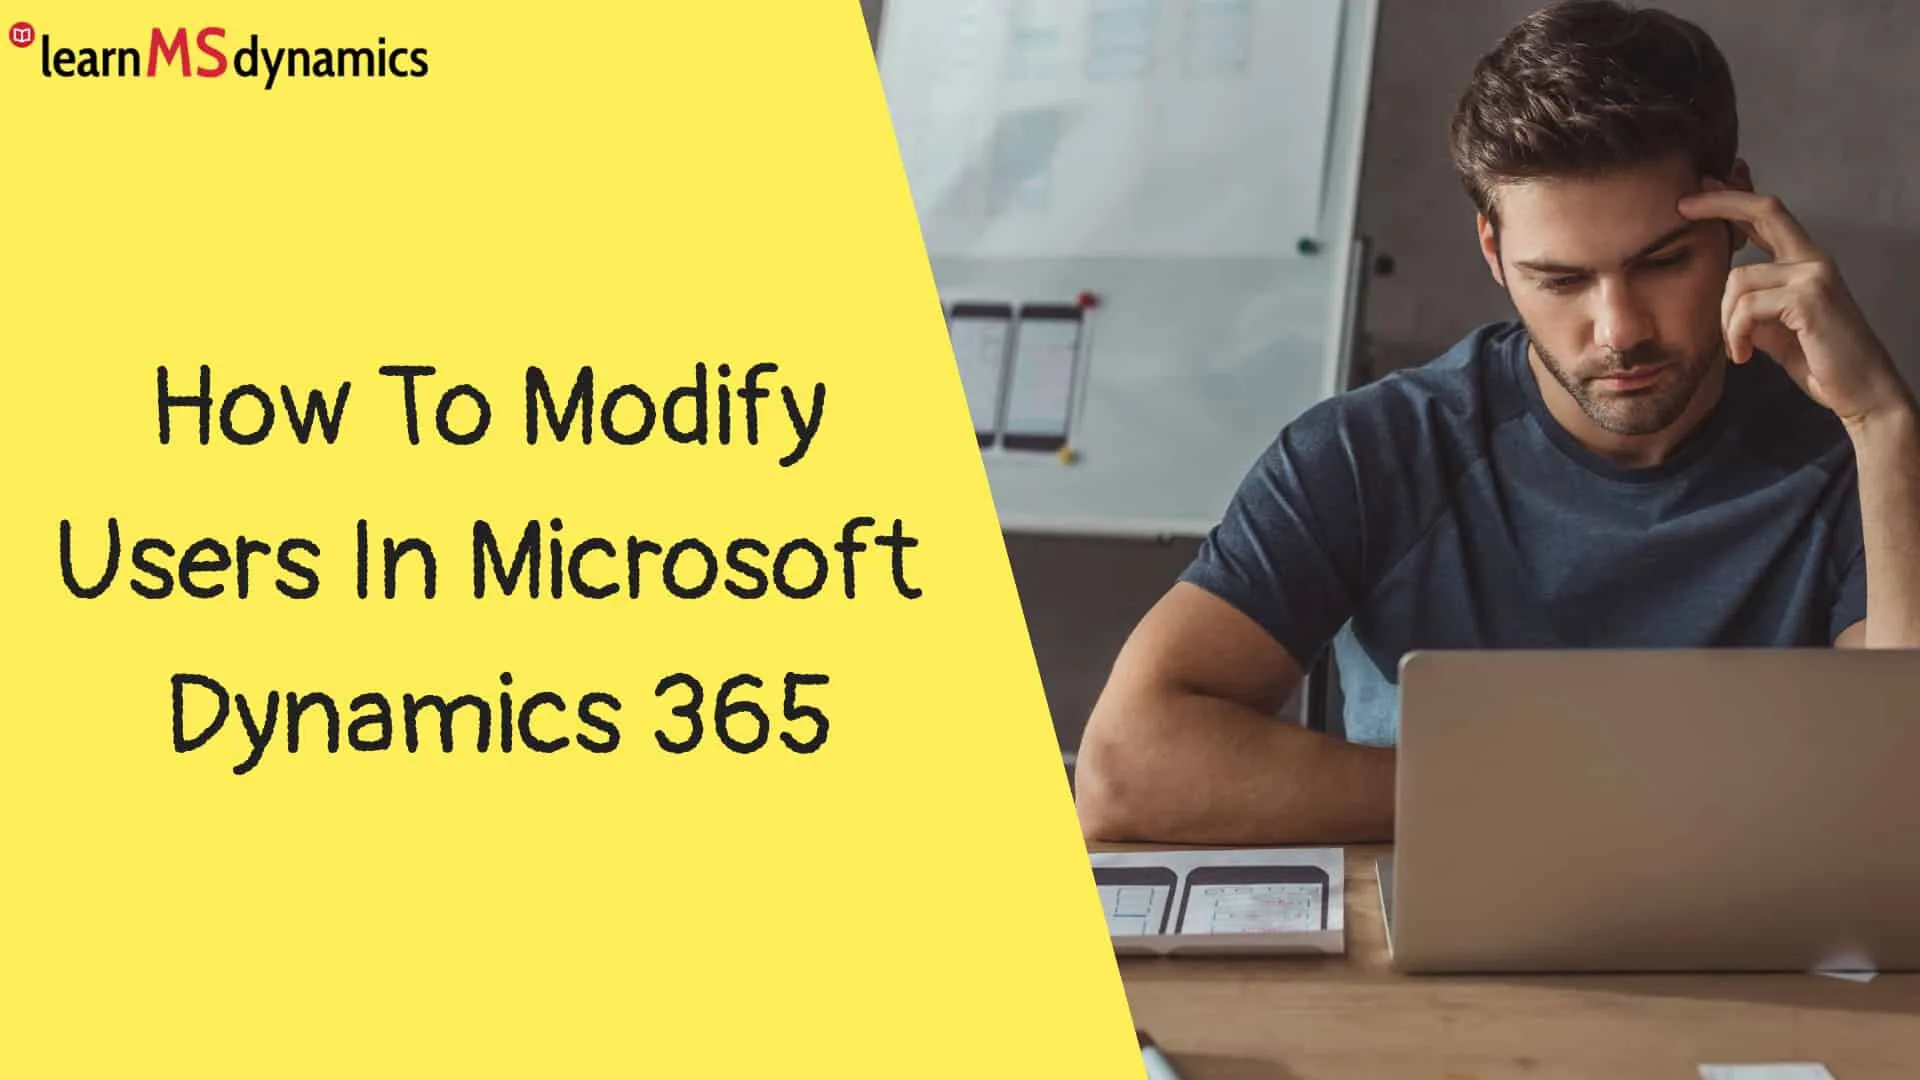 How To Modify Users In Microsoft Dynamics 365